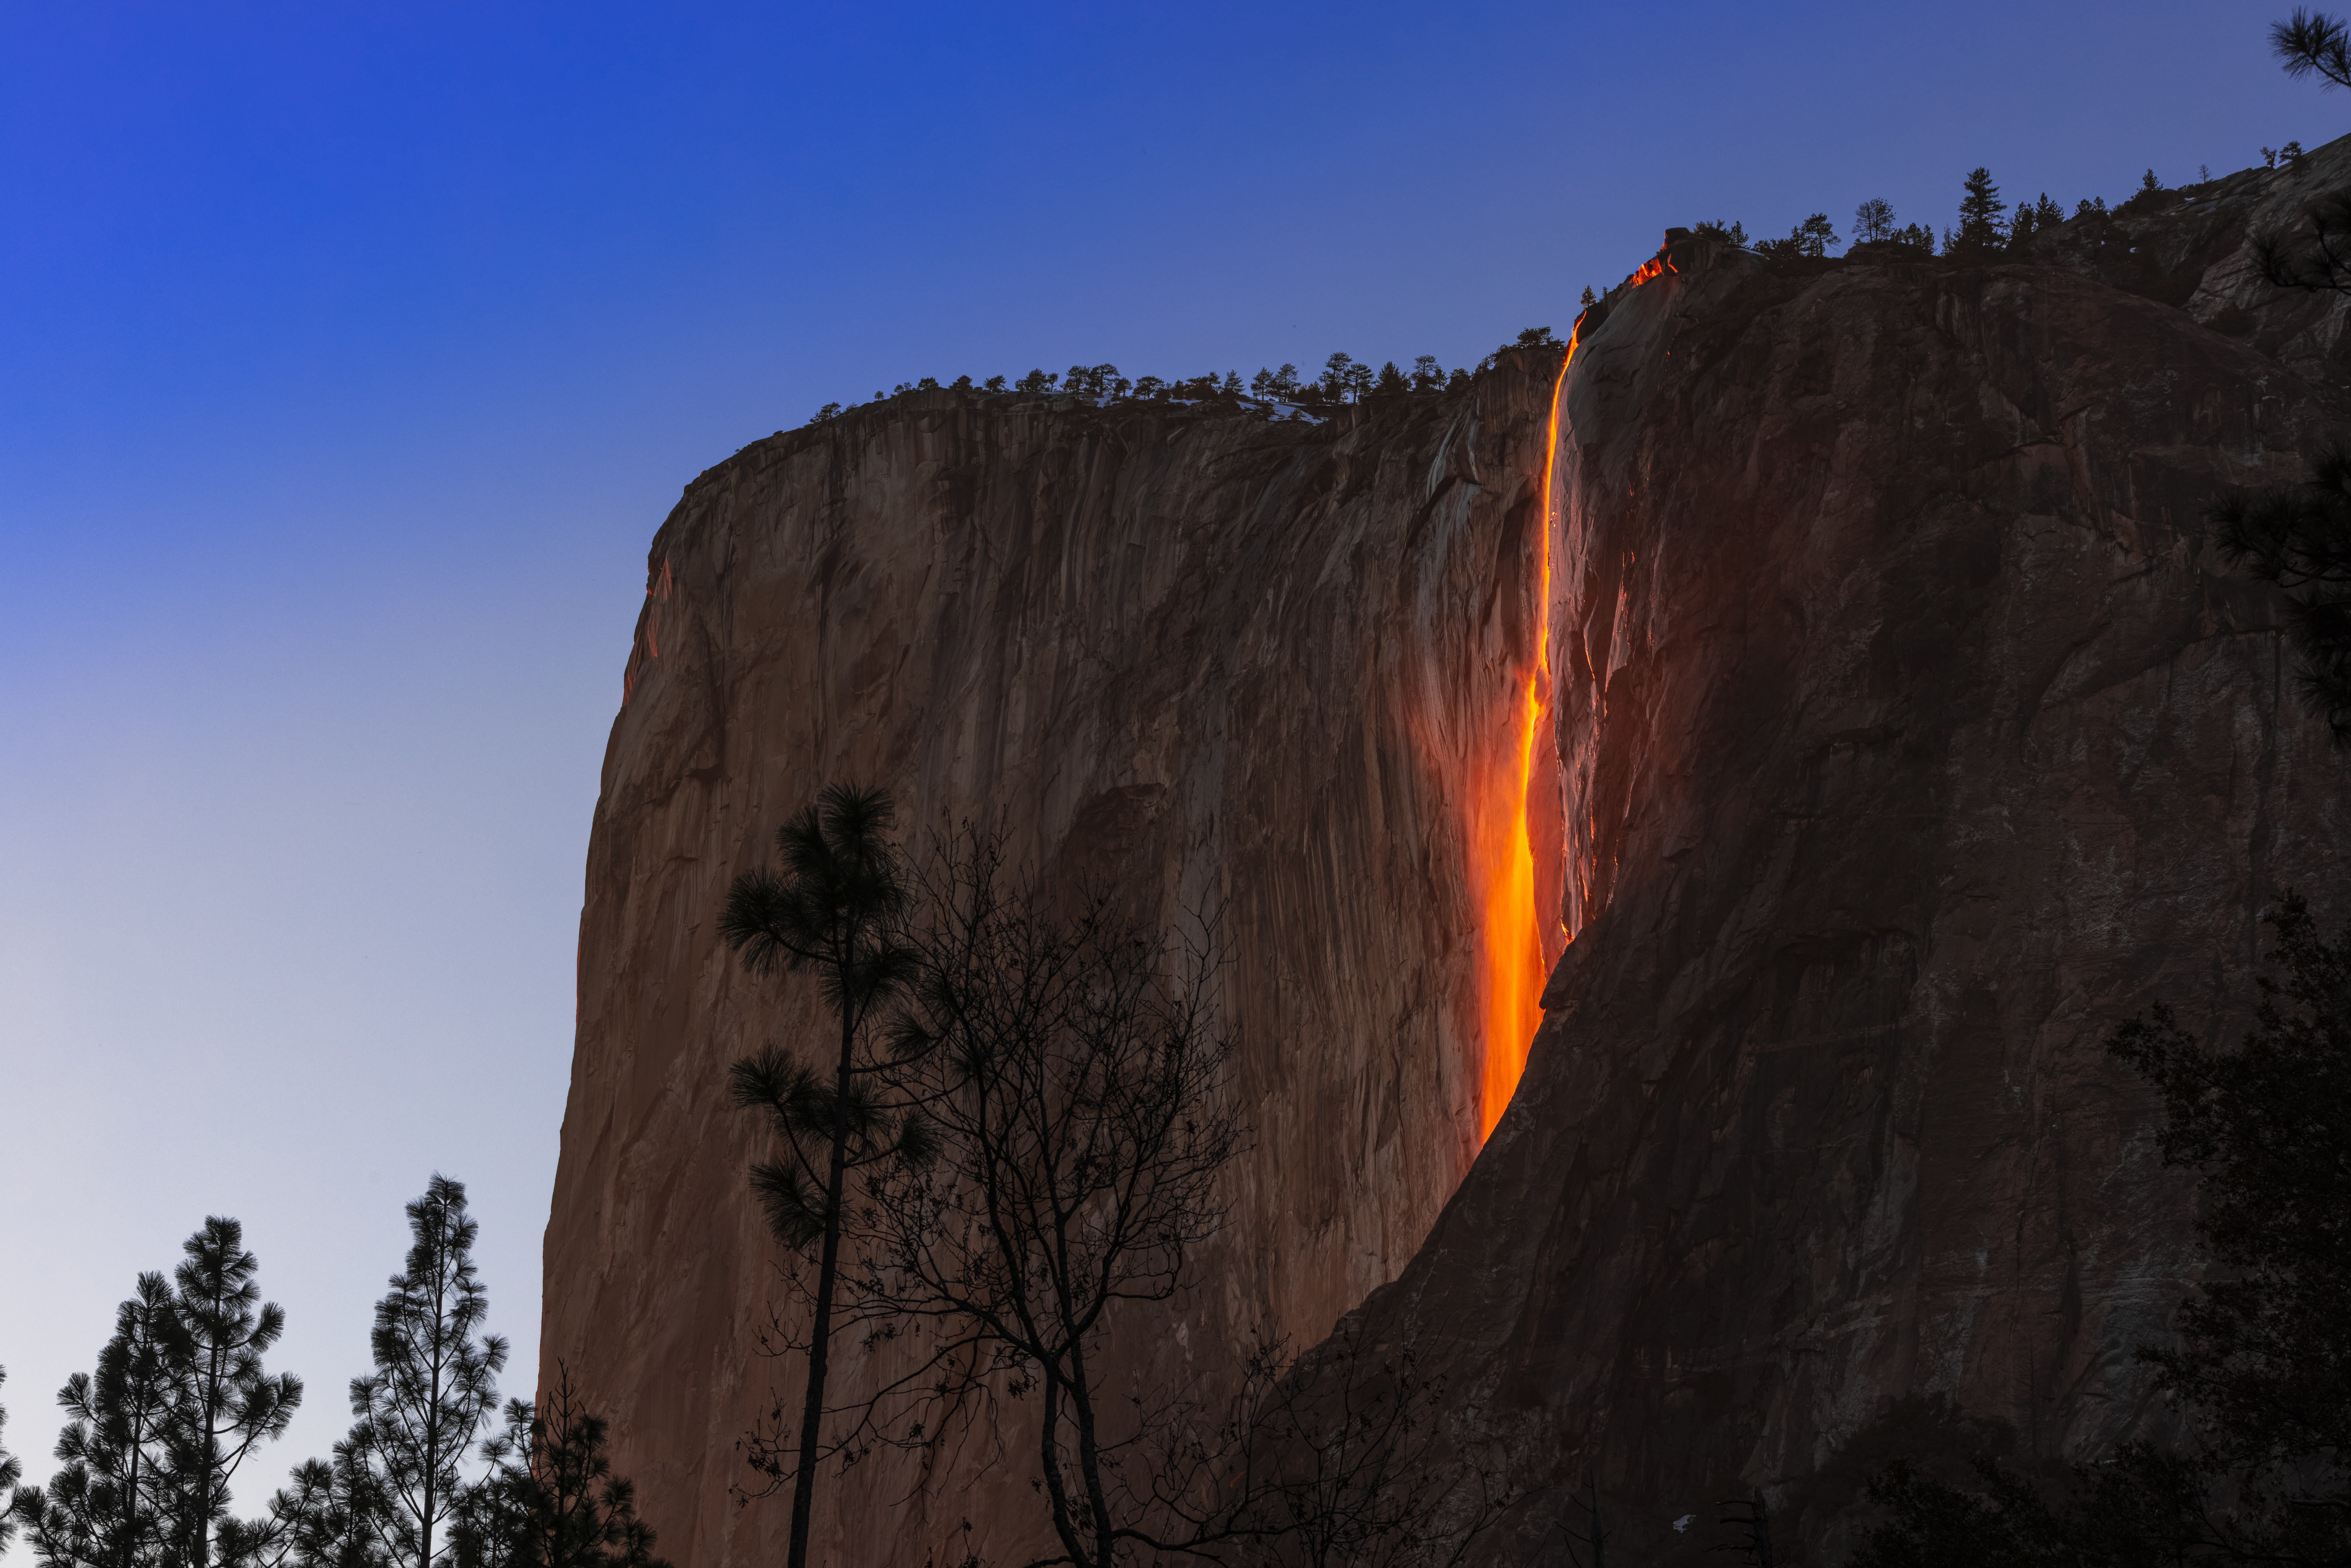 The horsetail waterfall in Yosemite National Park in California as the Fire Fall during winter. The natural Firefall is one of Yosemite National Park’s most amazing spectacles. Around the second week of February, the setting sun hits Horsetail Fall at just the right angle to illuminate the upper reaches of the waterfall. And when conditions are perfect, Horsetail Fall glows orange and red at sunset.